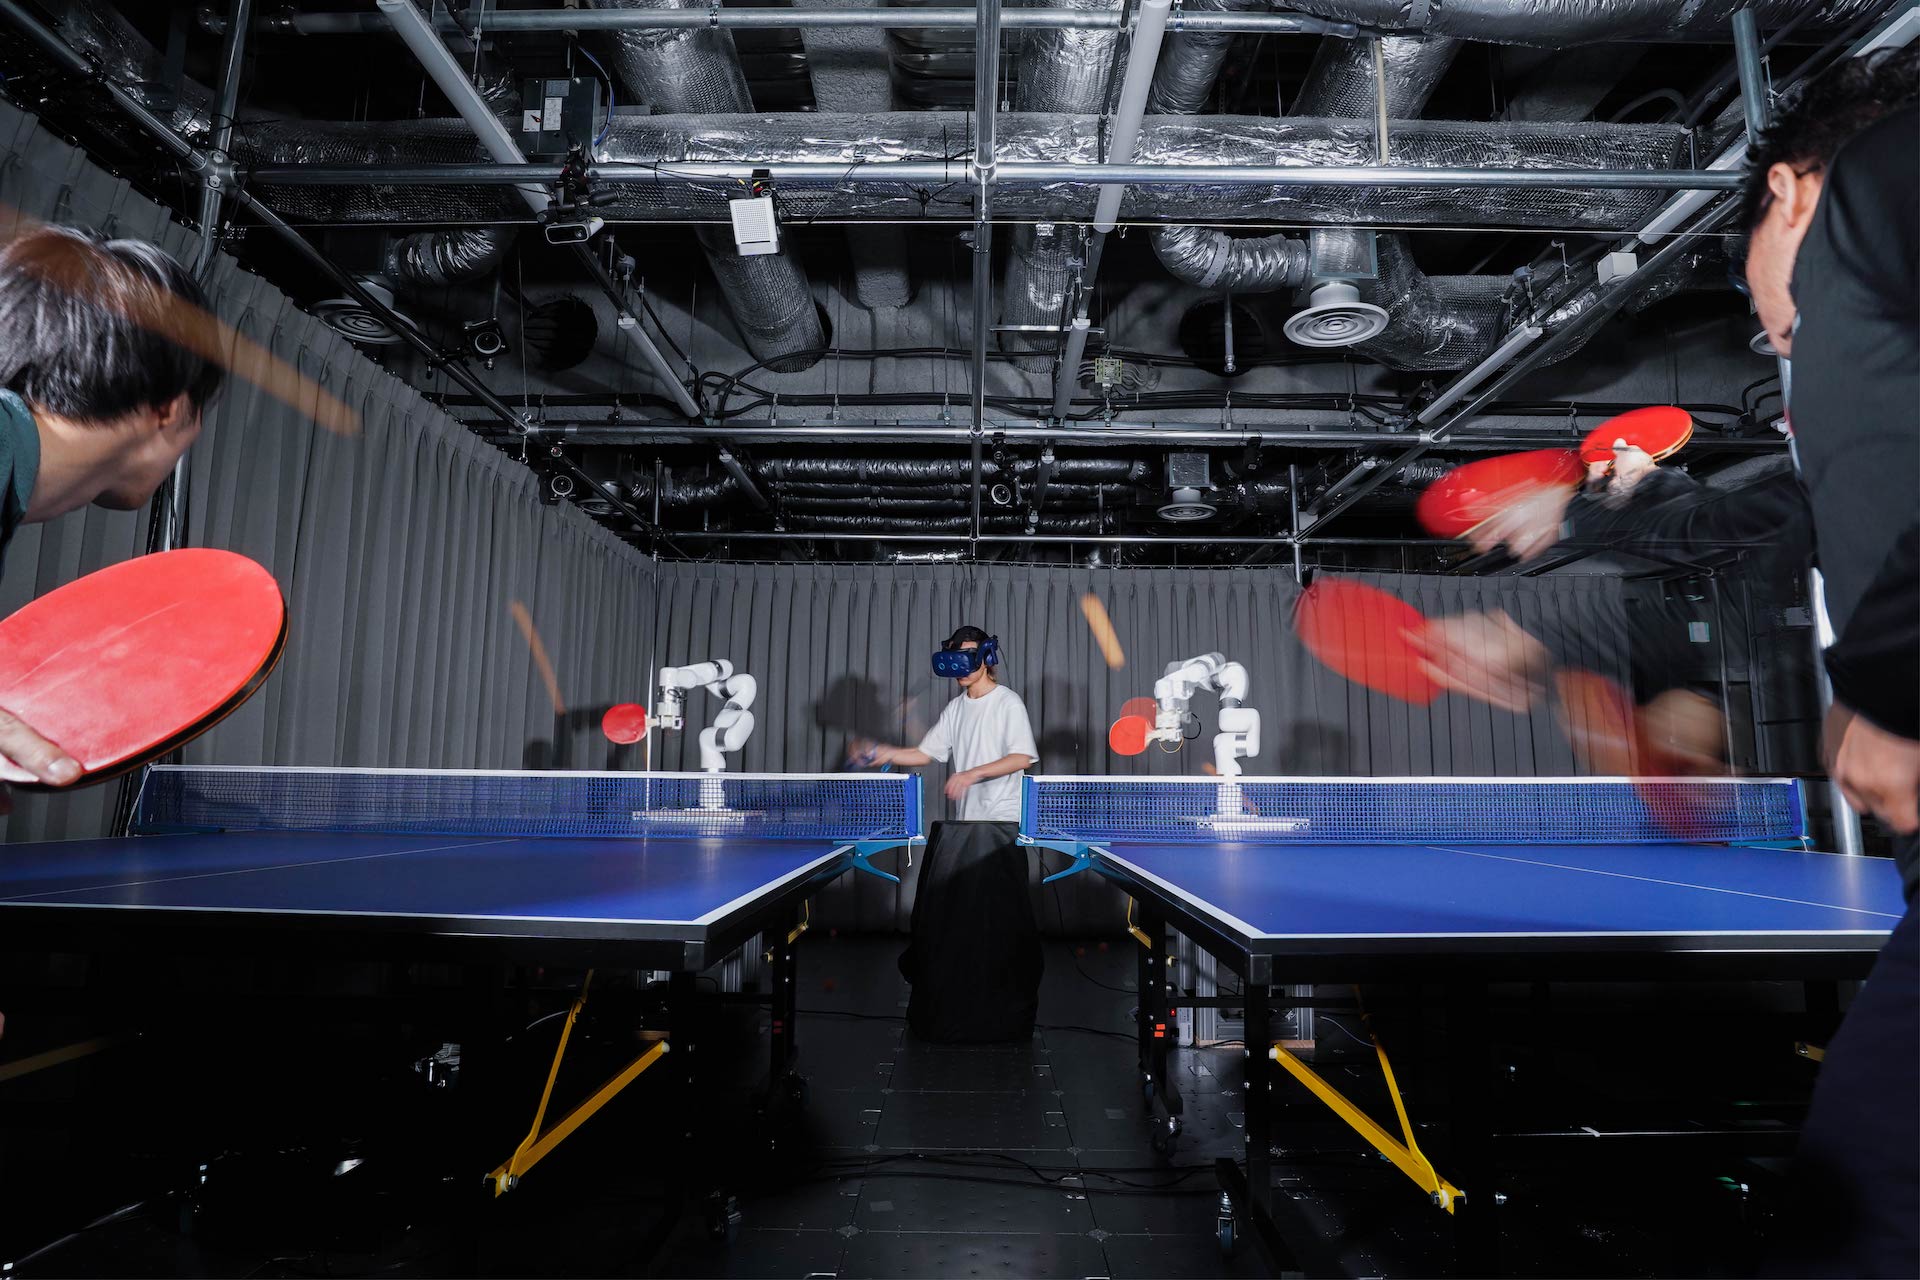 Parallel Ping-Pong: Demonstrating Parallel Interaction through Multiple Bodies by a Single User